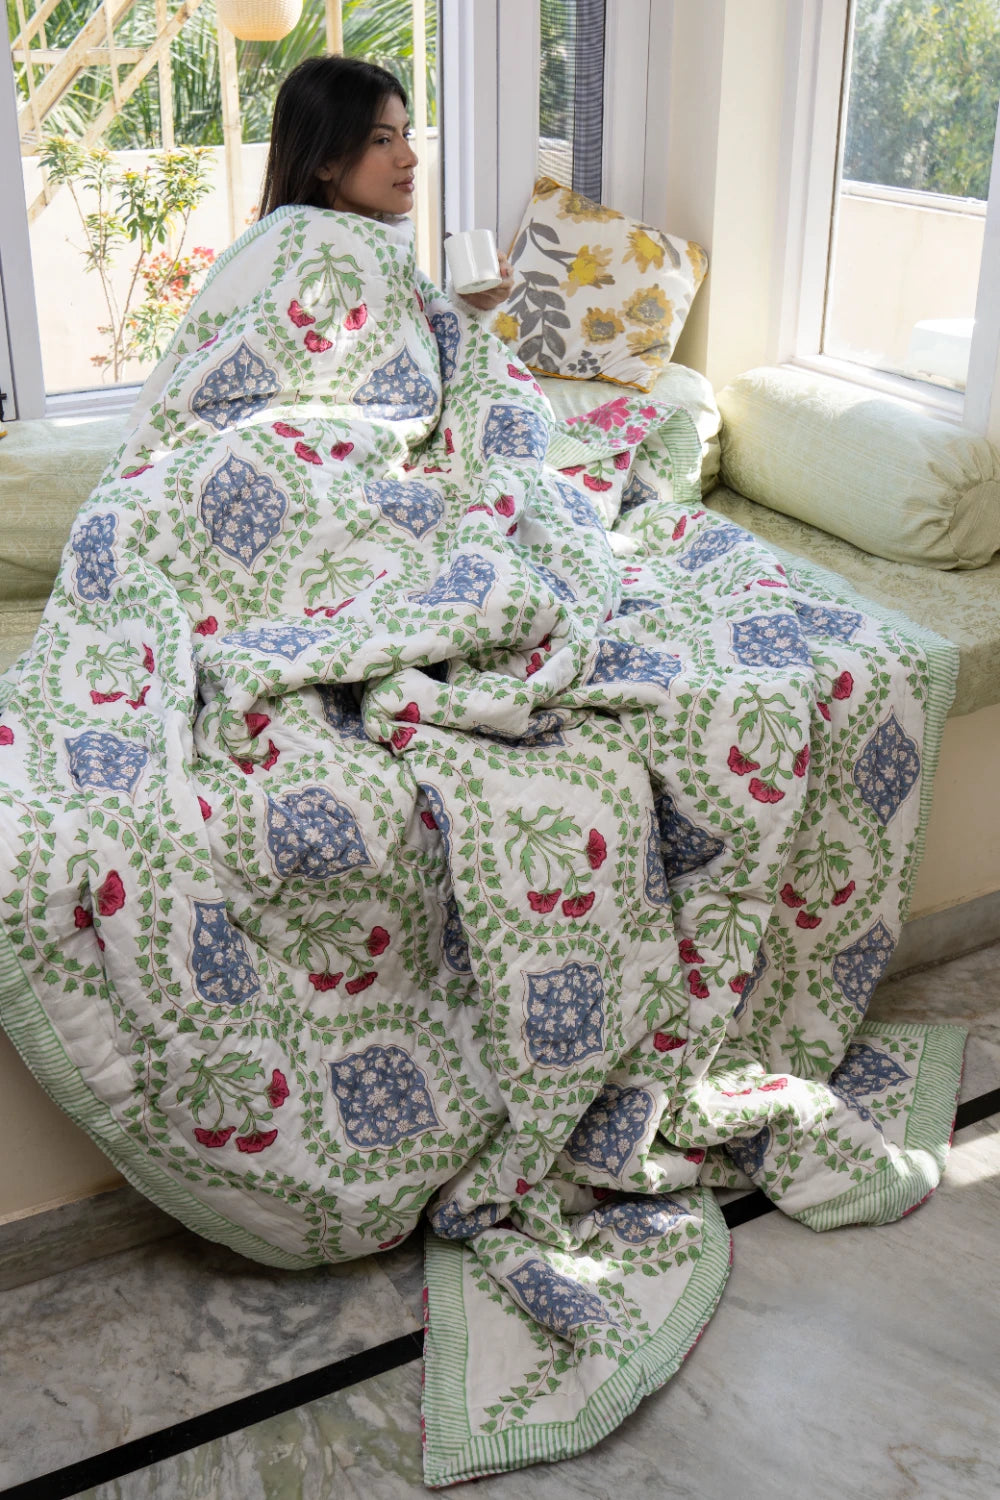 All-Season Mulmul Cotton Quilt for AC Nights